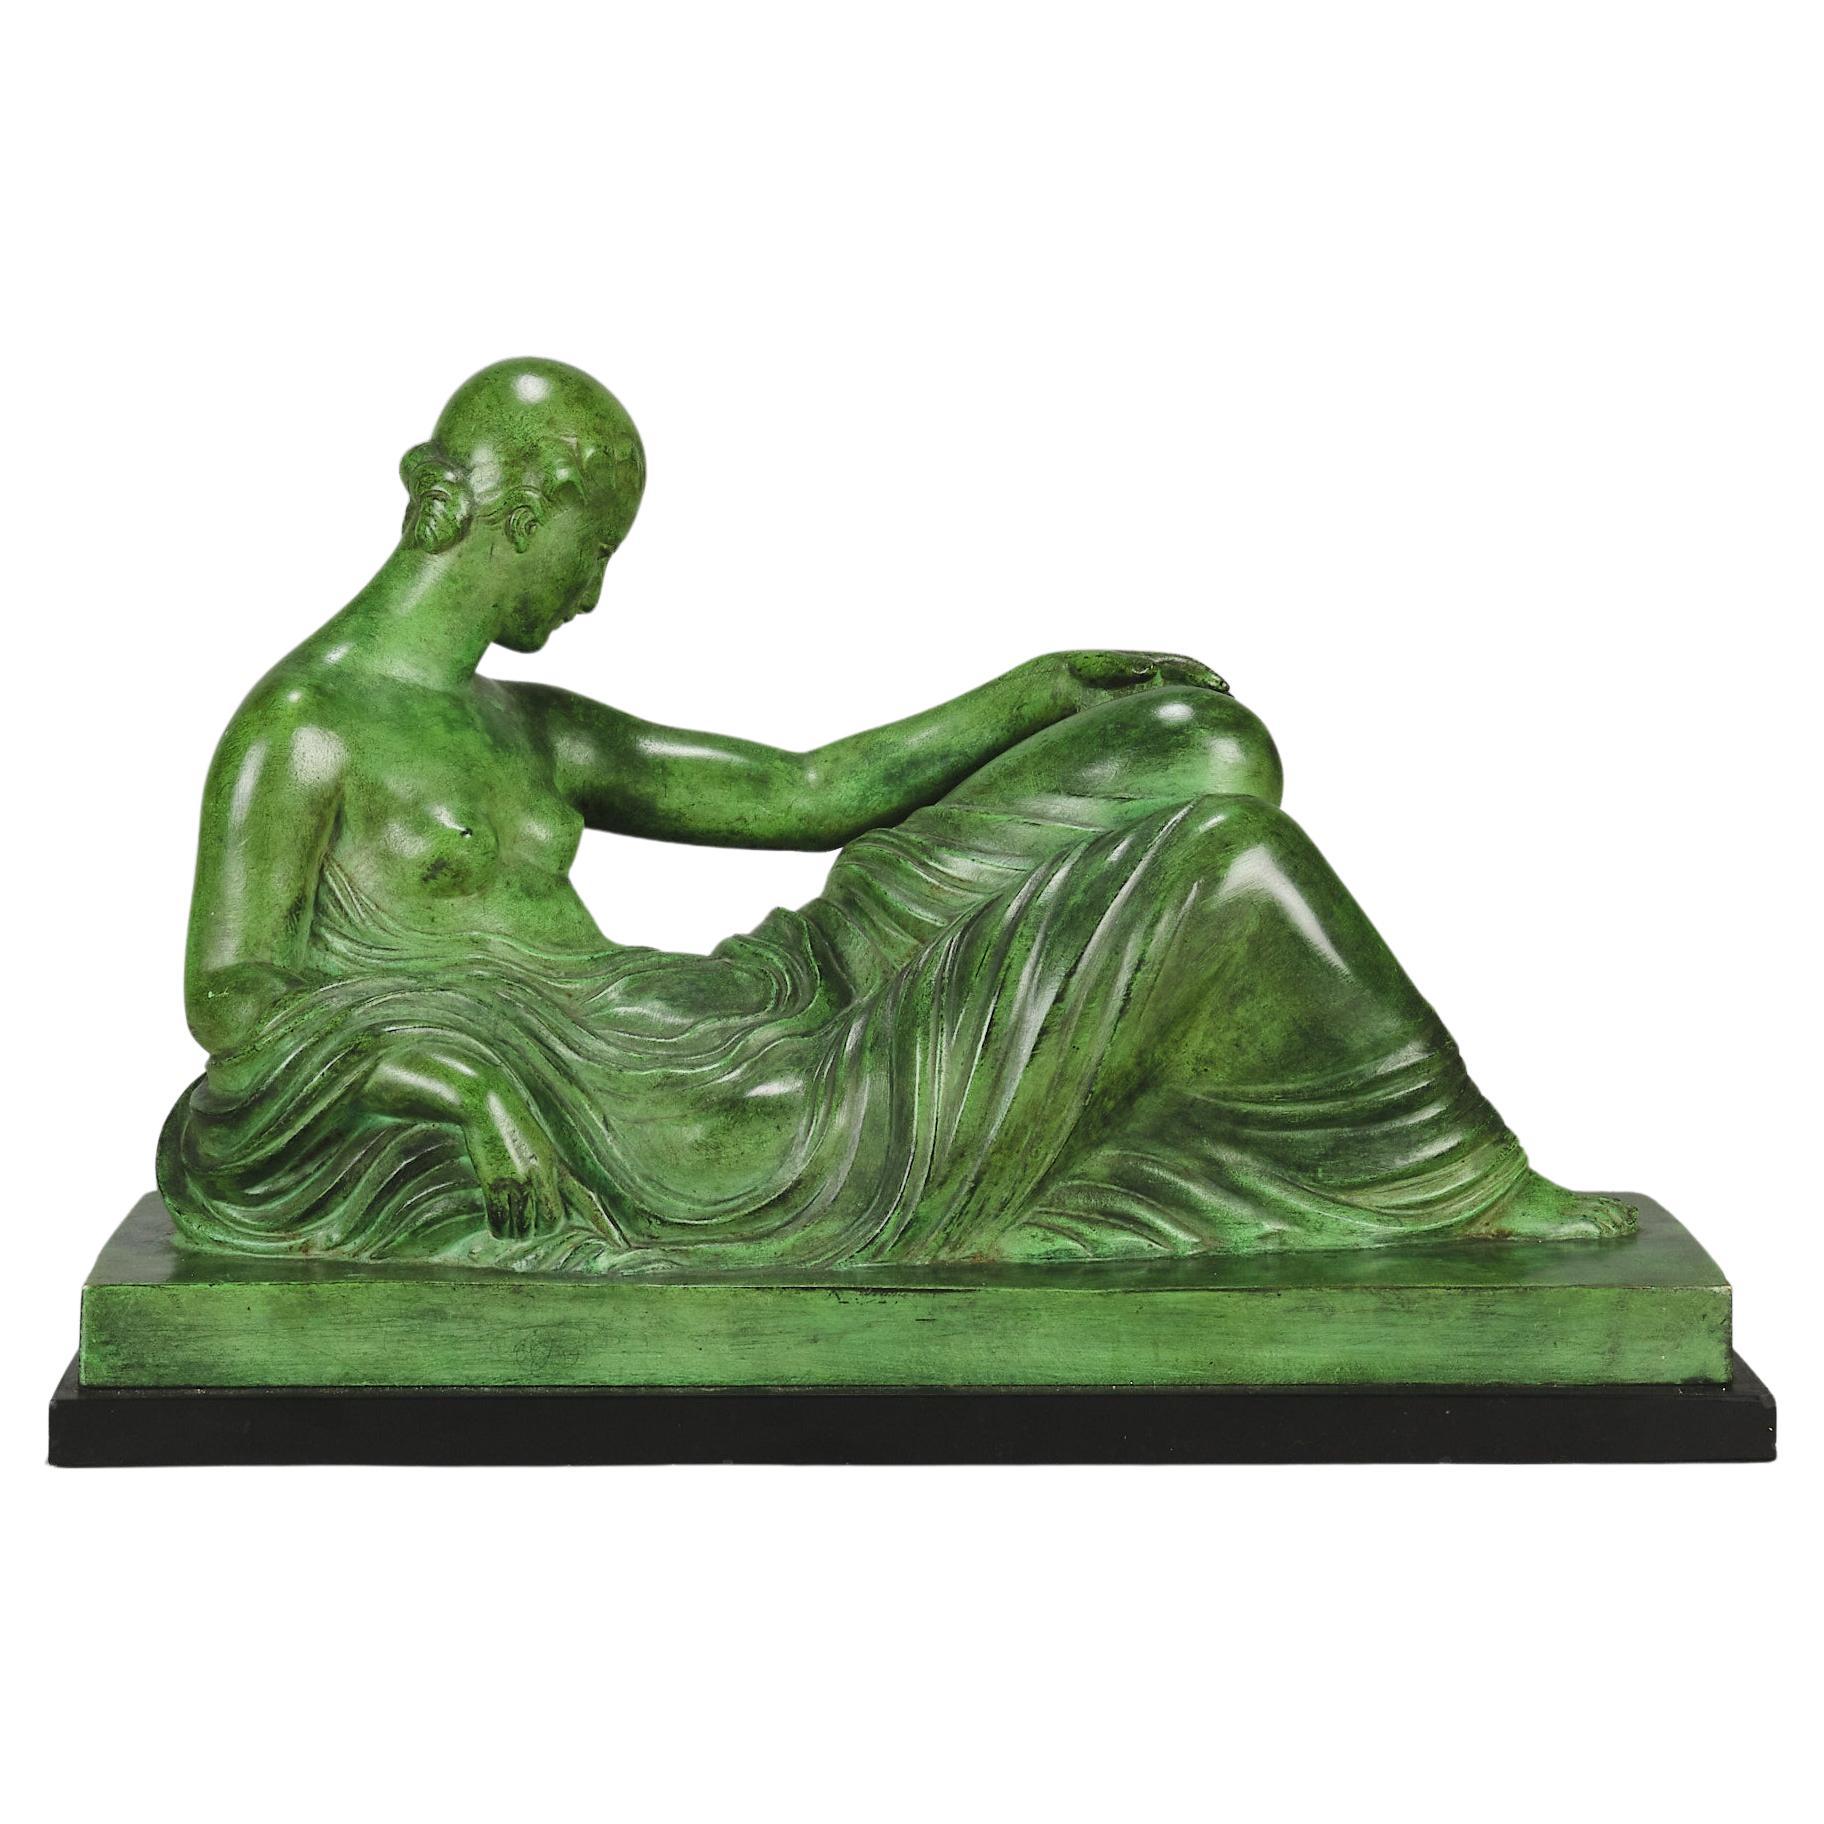 Early 20th Century Patinated Bronze Entitled "Femme Allongée" by Gaston Béguin For Sale